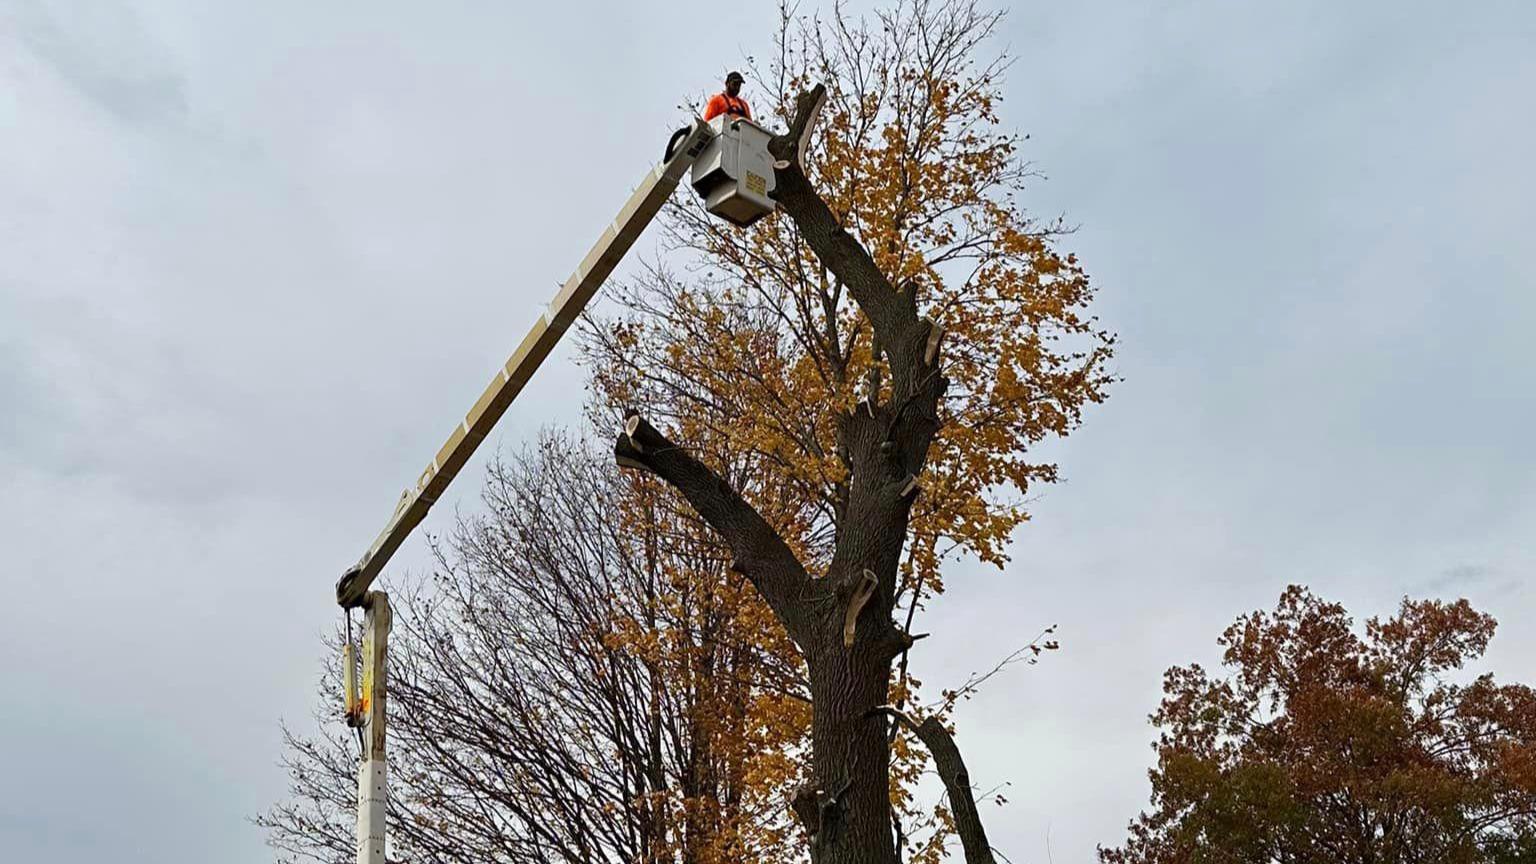 At S&P Tree Professionals, we are dedicated to delivering top-notch tree services that encompass tree maintenance, removal, and more. Our skilled team is committed to enhancing the health and aesthetics of your trees, providing prompt and reliable service to meet your tree care needs.